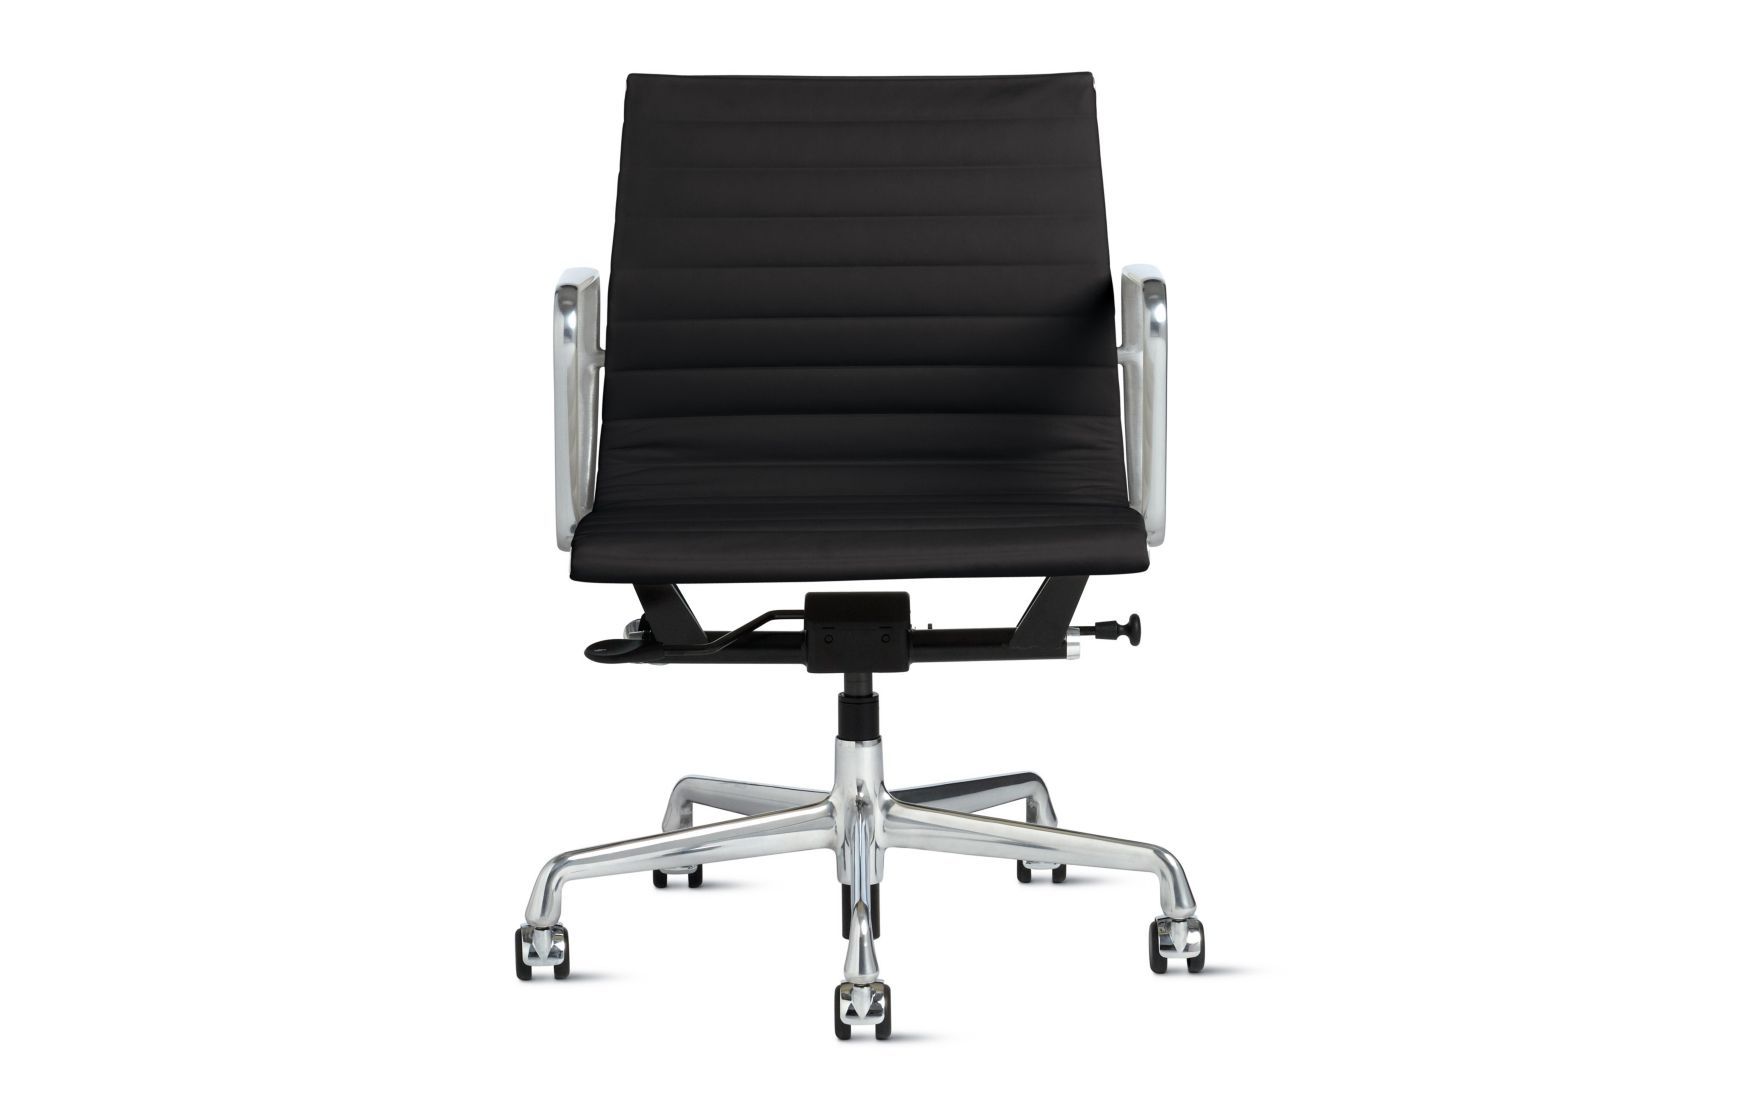 Eames® Aluminum Group Management Chair with Pneumatic Lift | Design Within Reach